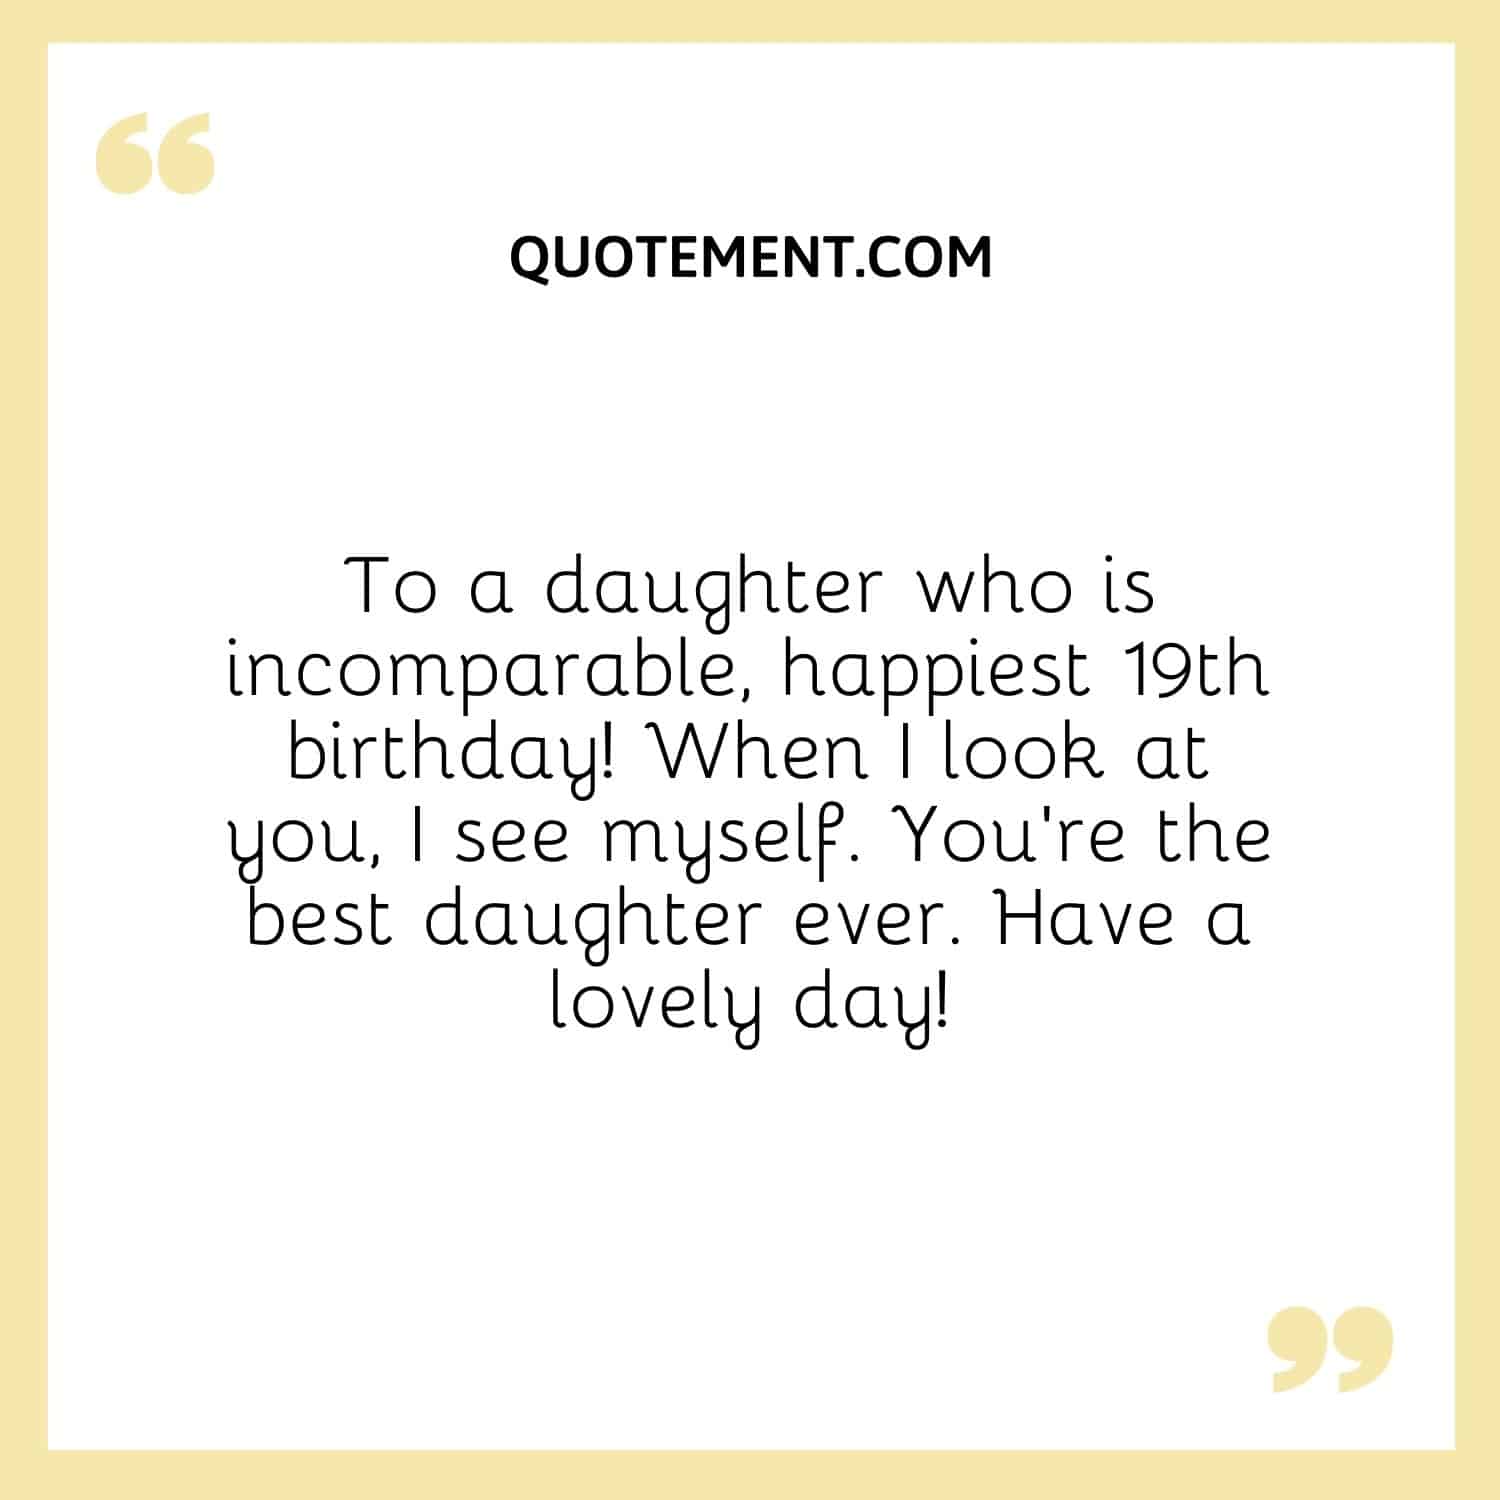 To a daughter who is incomparable